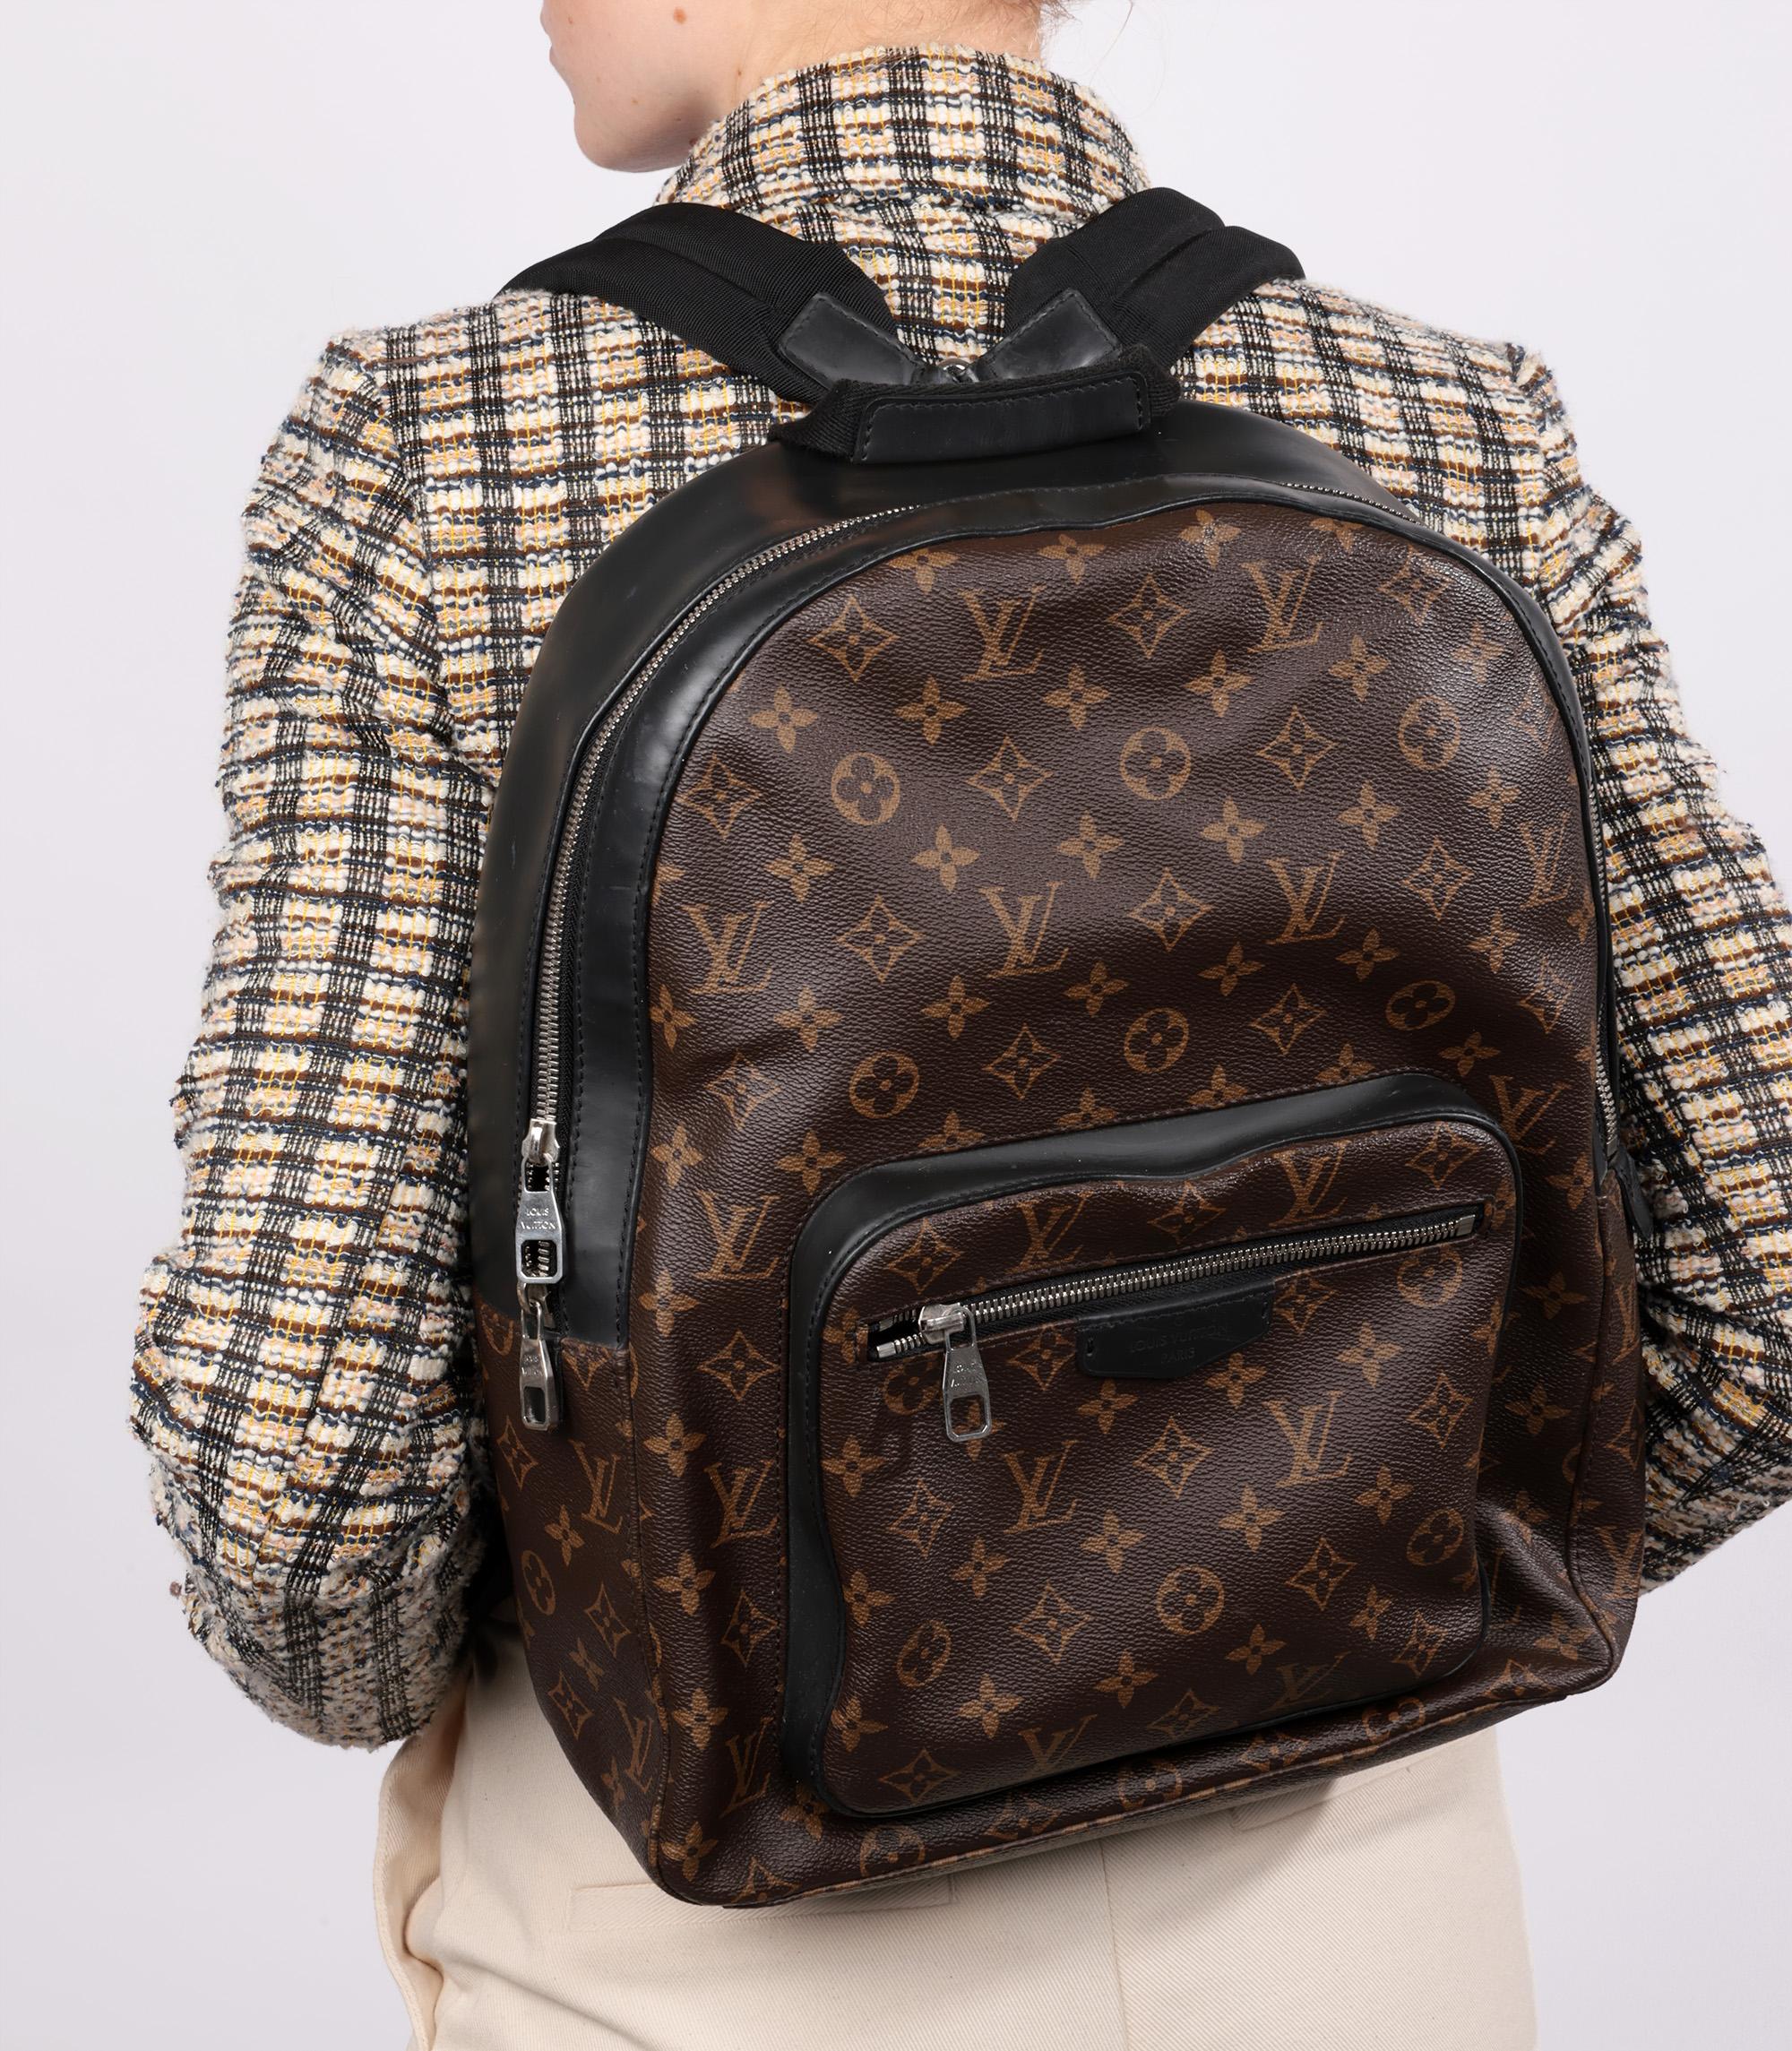 Louis Vuitton Brown Monogram Coated Canvas & Black Calfskin Leather Josh Backpack

Brand- Louis Vuitton
Model- Josh Backpack
Product Type- Backpack
Serial Number- TJ****
Age- Circa 2016
Colour- Brown
Hardware- Silver
Material(s)- Coated Canvas,